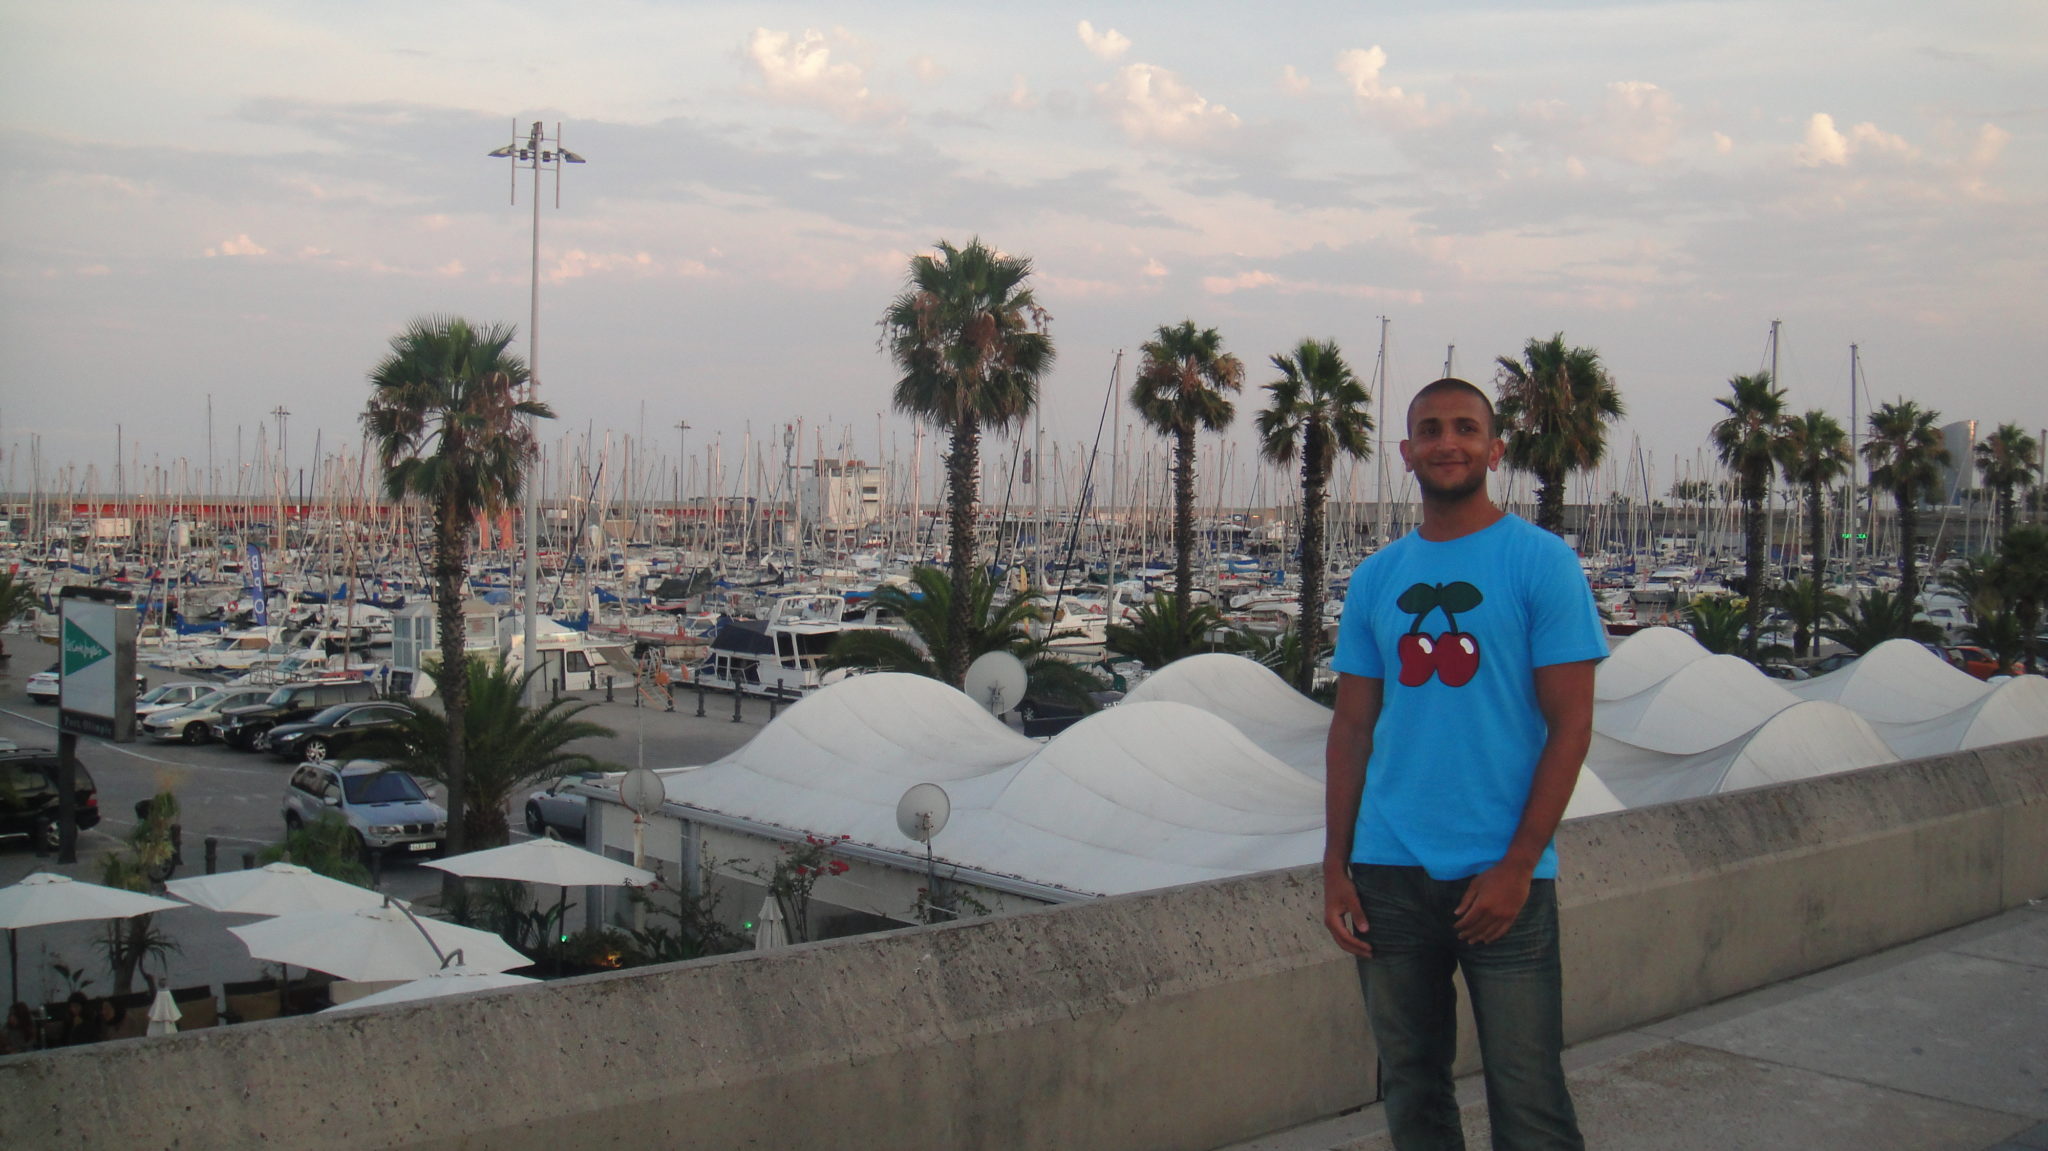 a man standing on a ledge with palm trees and boats in the background